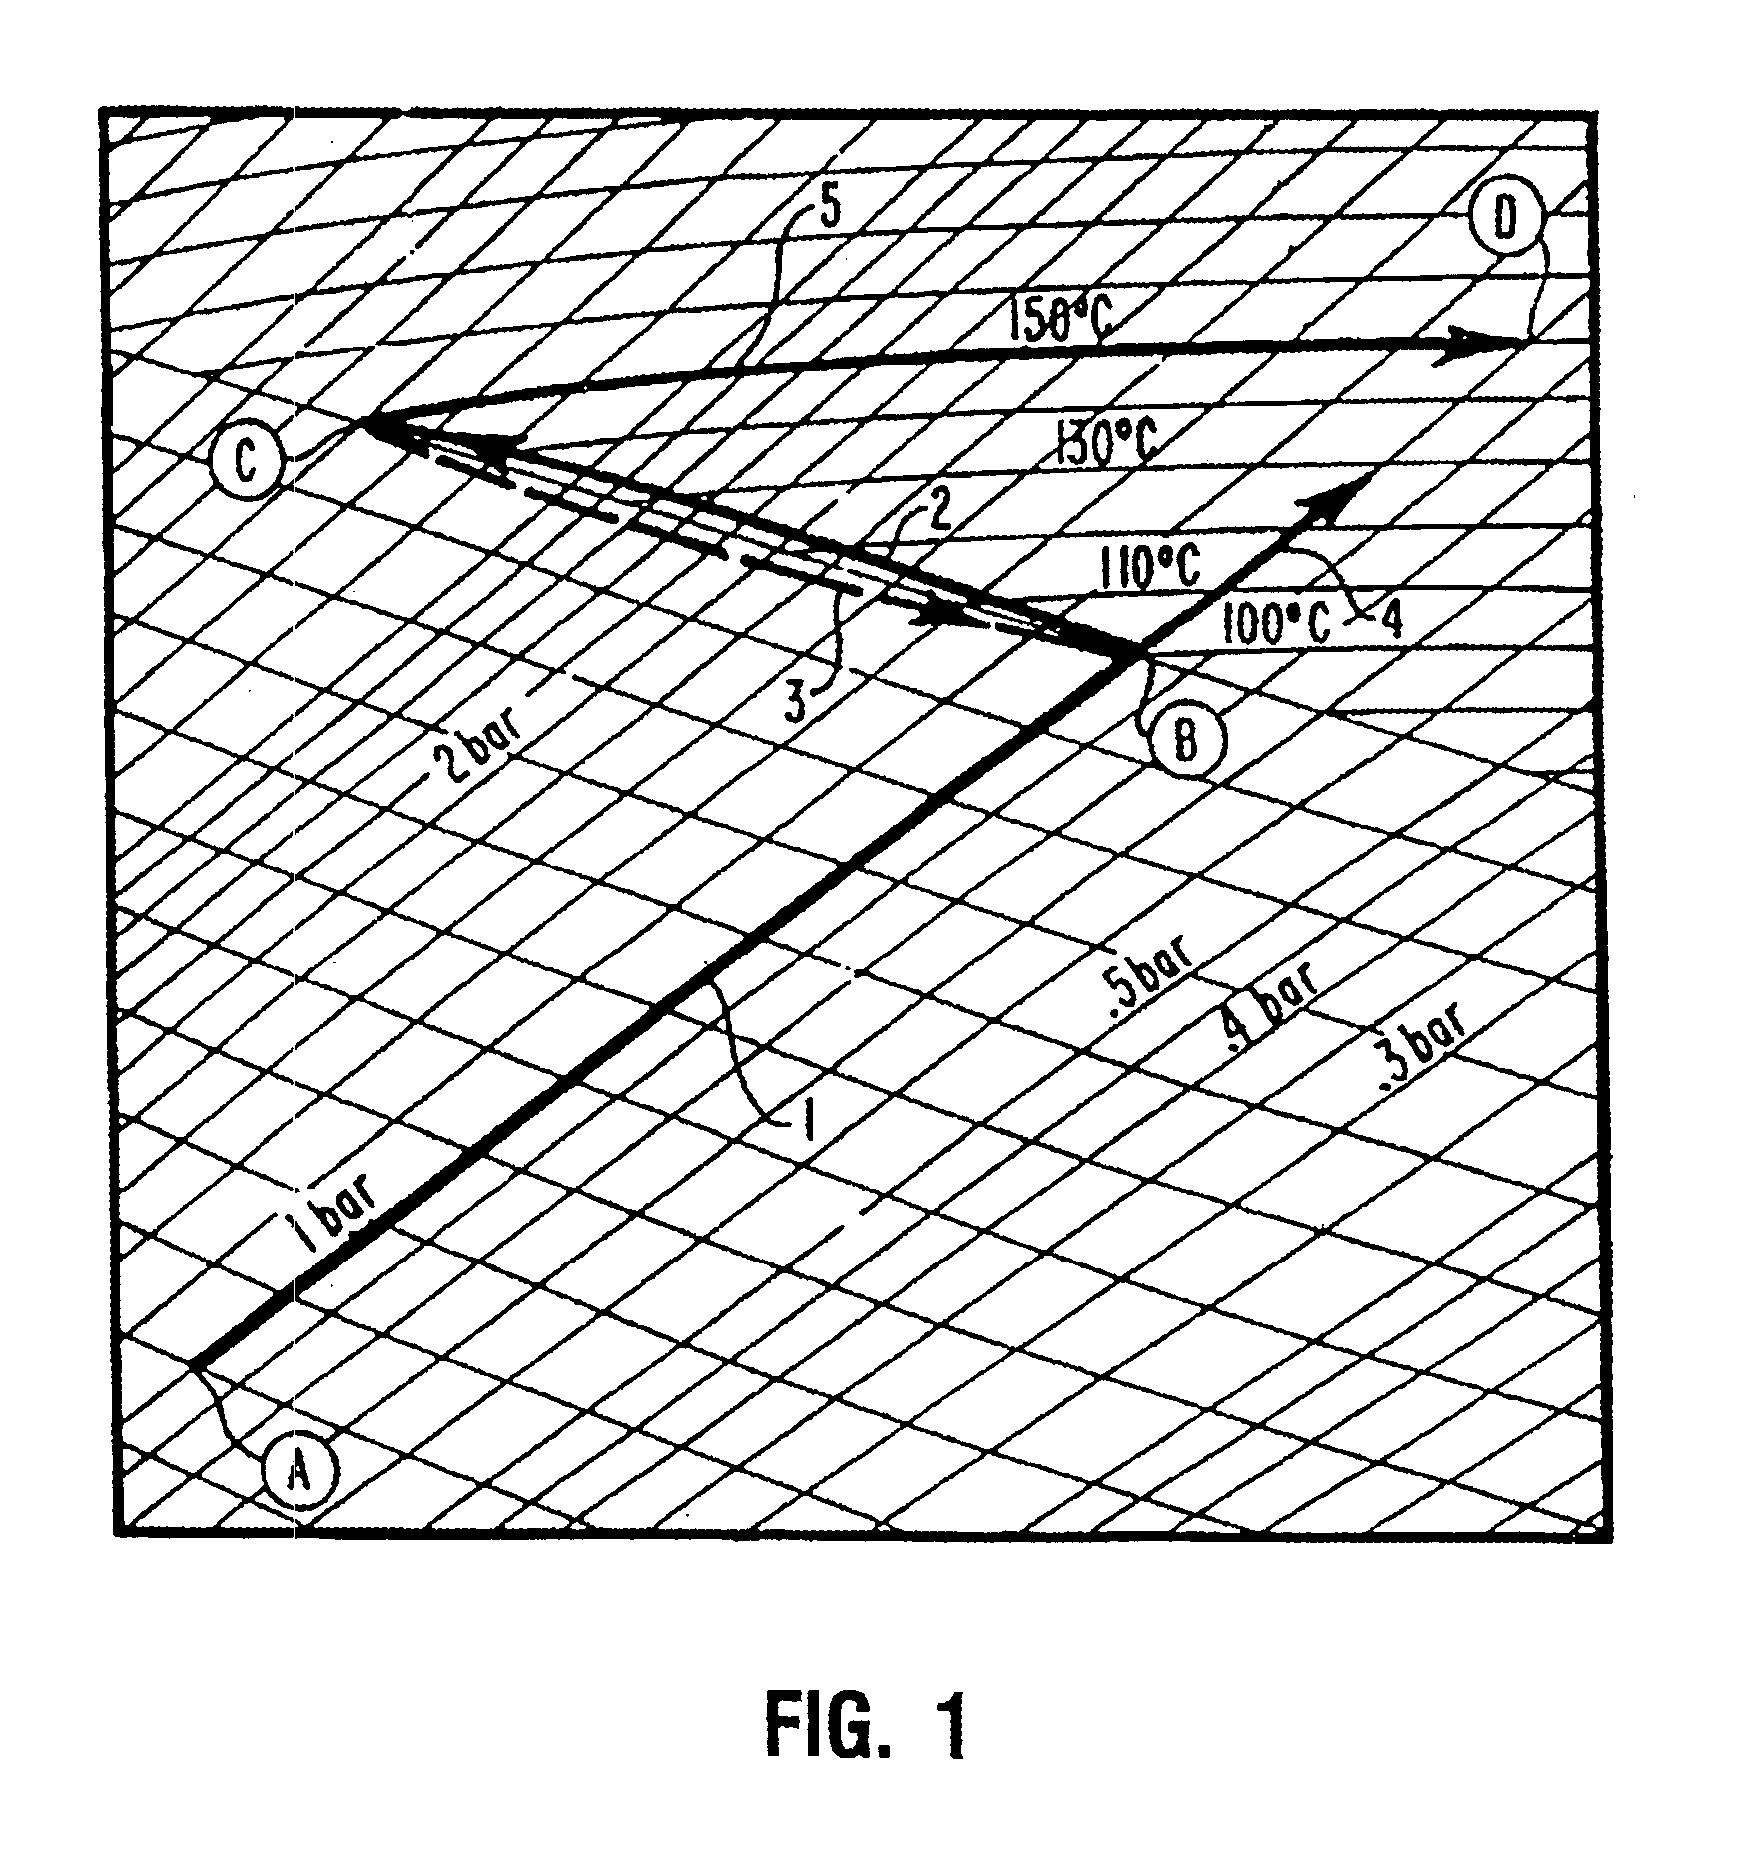 Compositions for manufacturing fiber-reinforced, starch-bound articles having a foamed cellular matrix